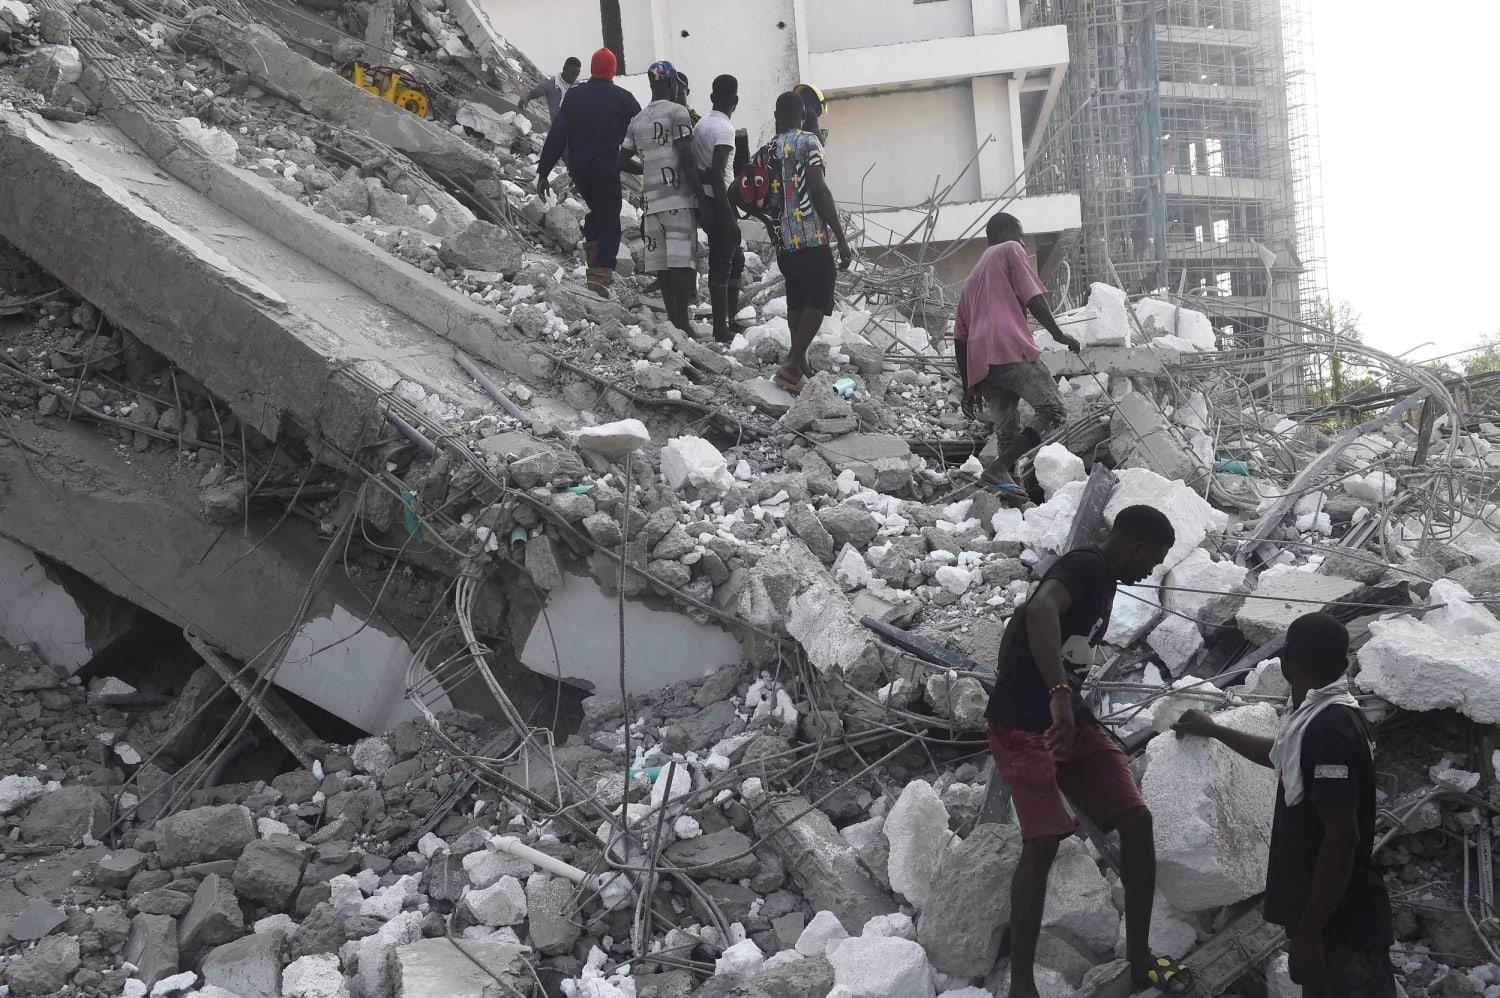 Dozens feared trapped under 21-story building collapse in Nigeria